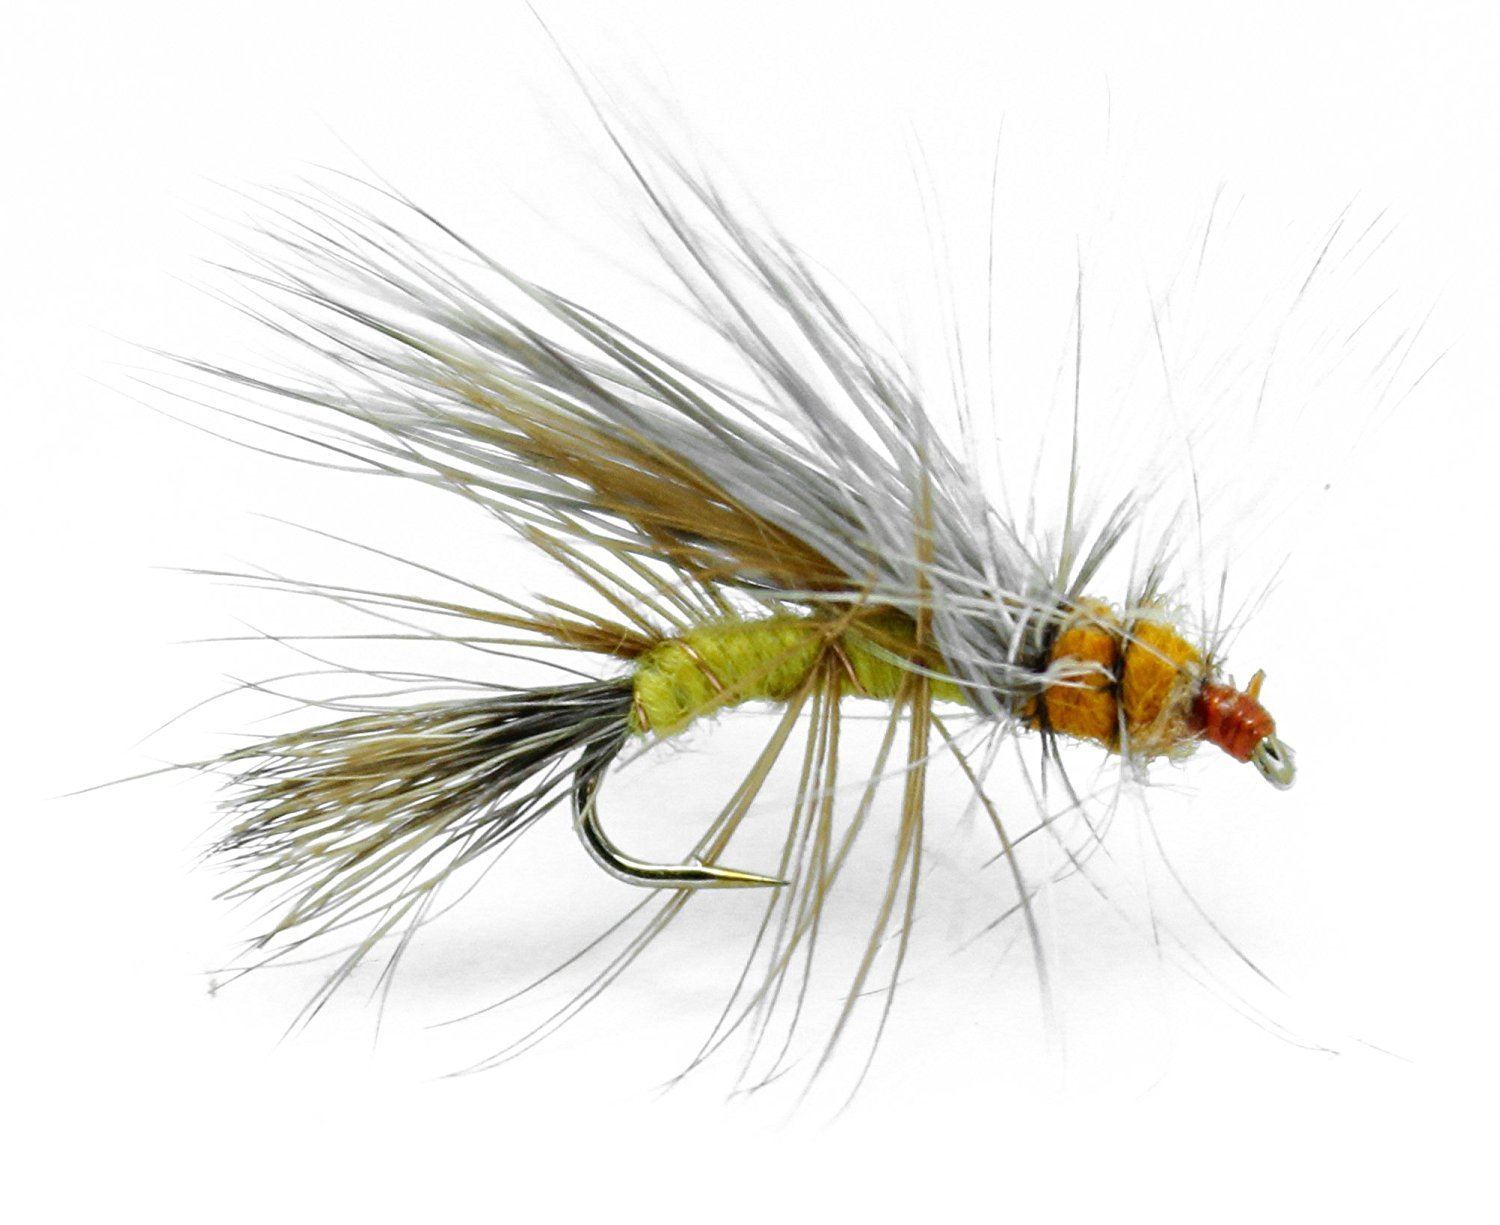  Feeder Creek Stimulator Olive/Green Dry Fly, 12 Fly Fishing  Lures for Trout, Panfish, Steelhead & More Freshwater Fish, Hand Tied, 4  Size Assortment 12,14,16,18 : Sports & Outdoors